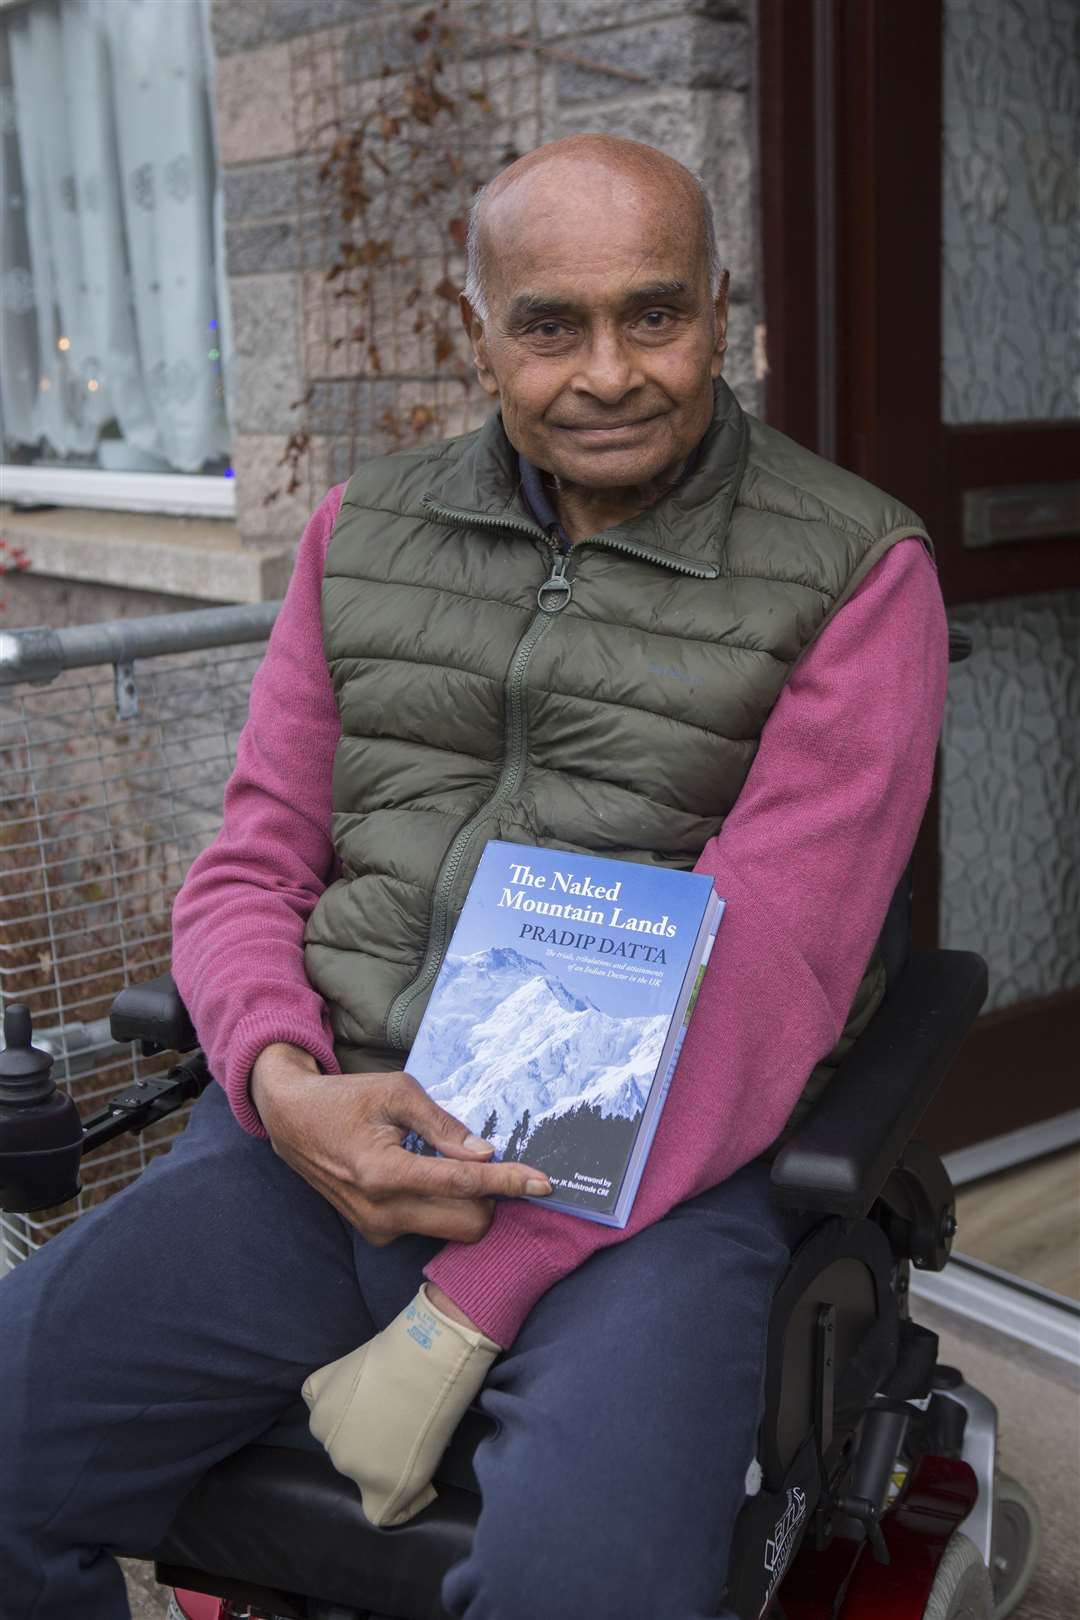 Pradip Datta, MBE MS FRCS (1940-2022), with his earlier book, The Naked Mountain Lands. Picture: Robert MacDonald / Northern Studios